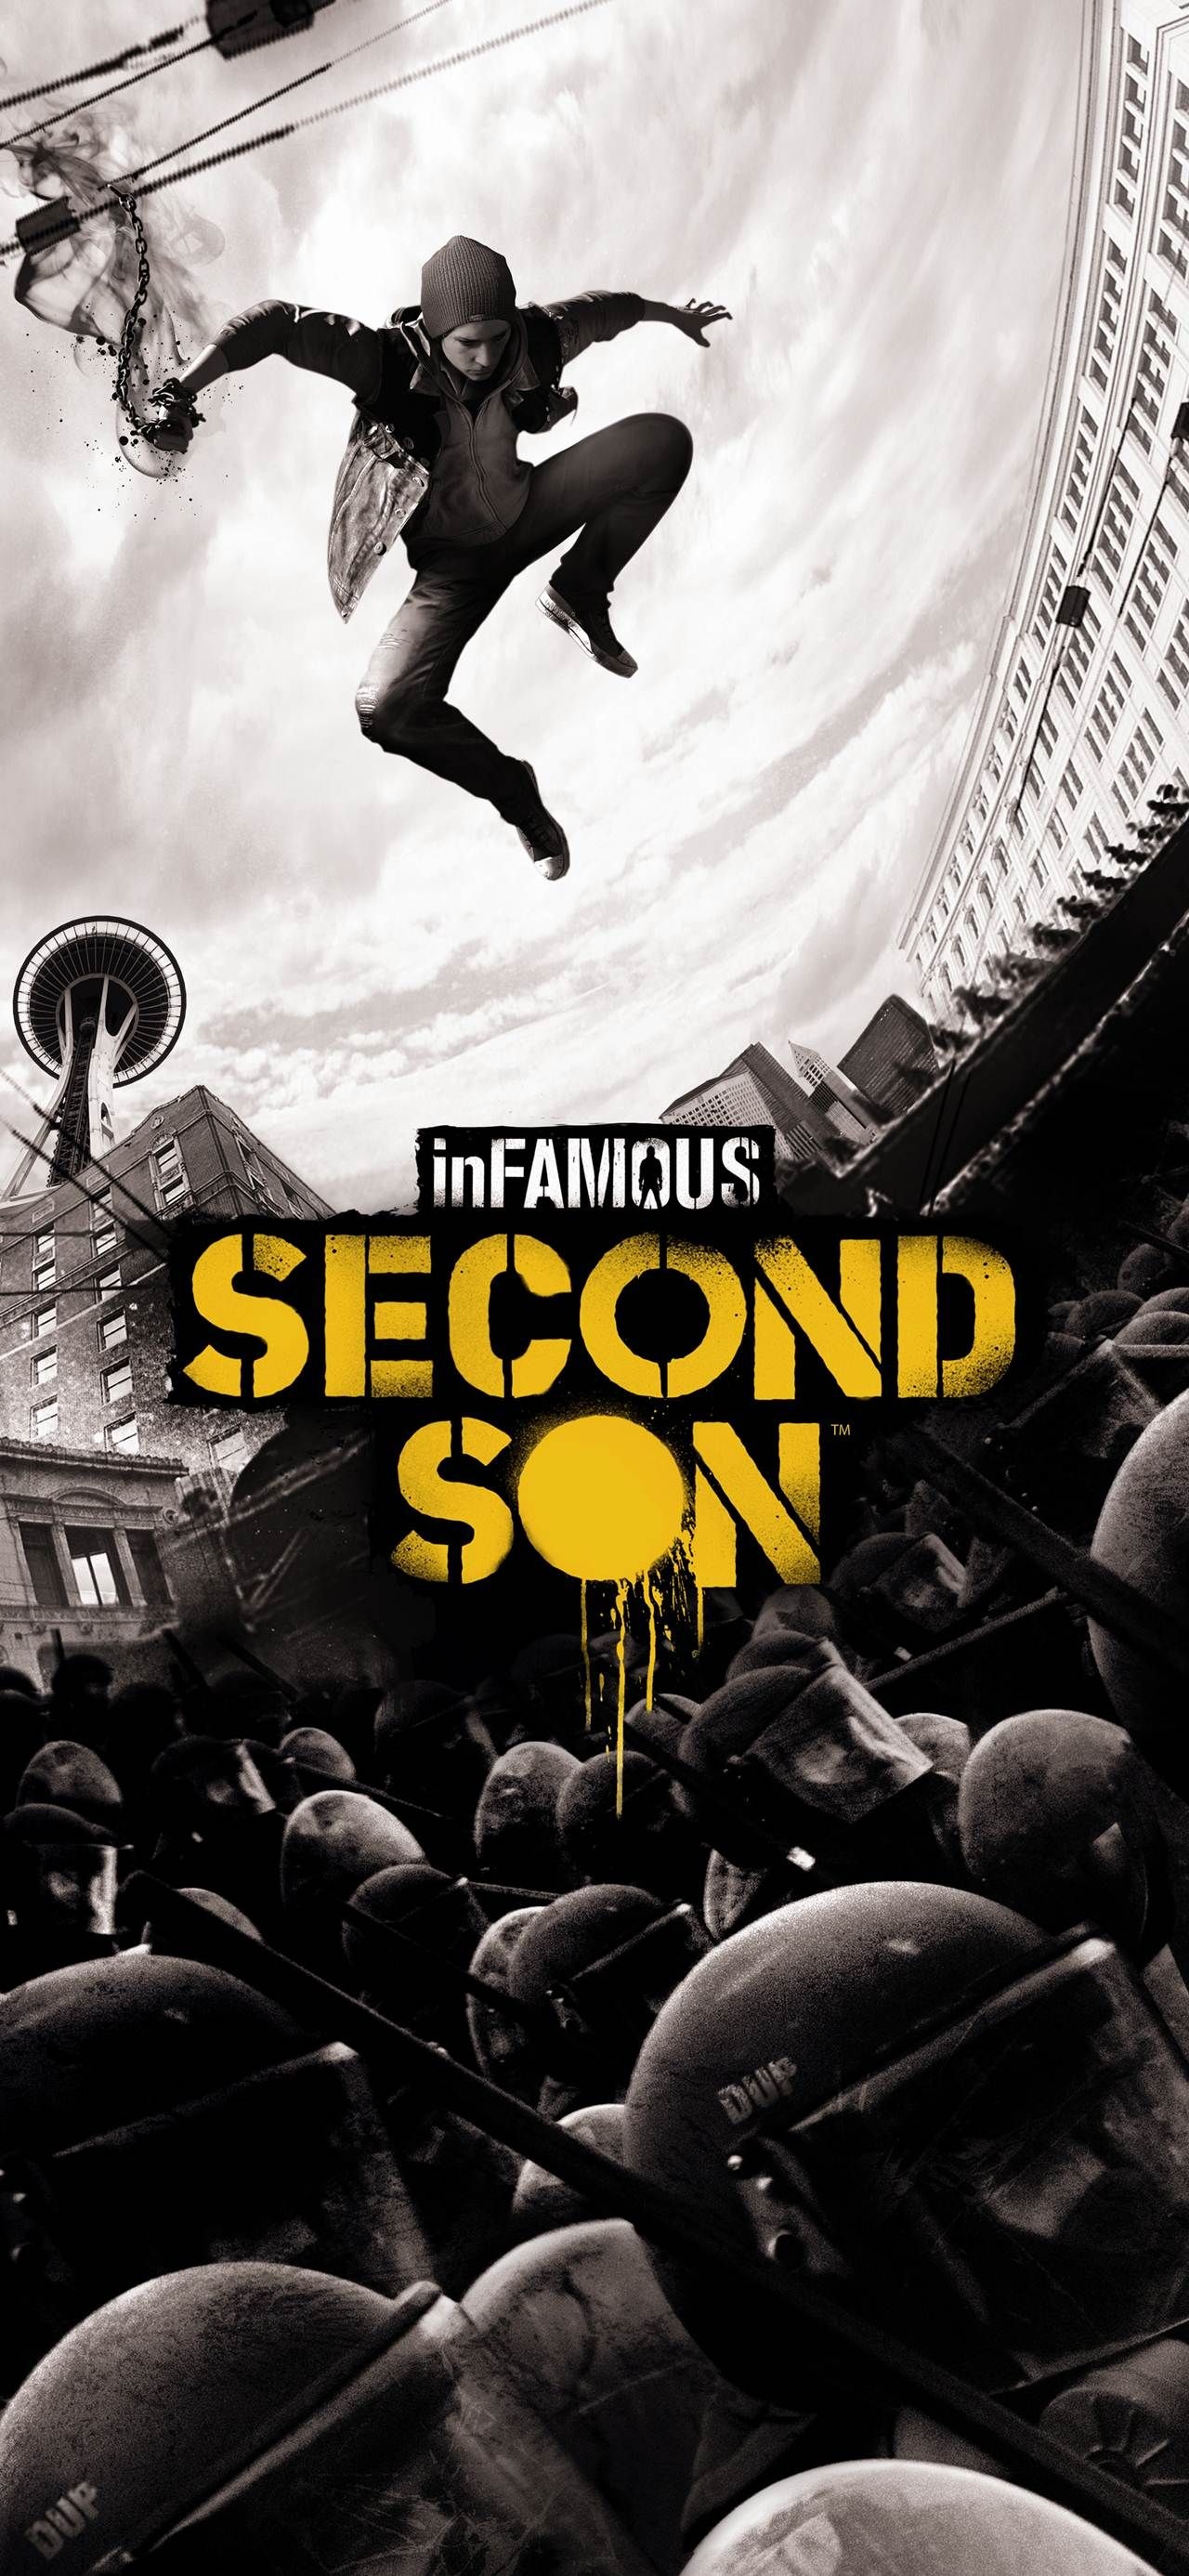 inFAMOUS: Second Son, Funny contests, Offbeat humor, Participate and win, 1280x2780 HD Phone